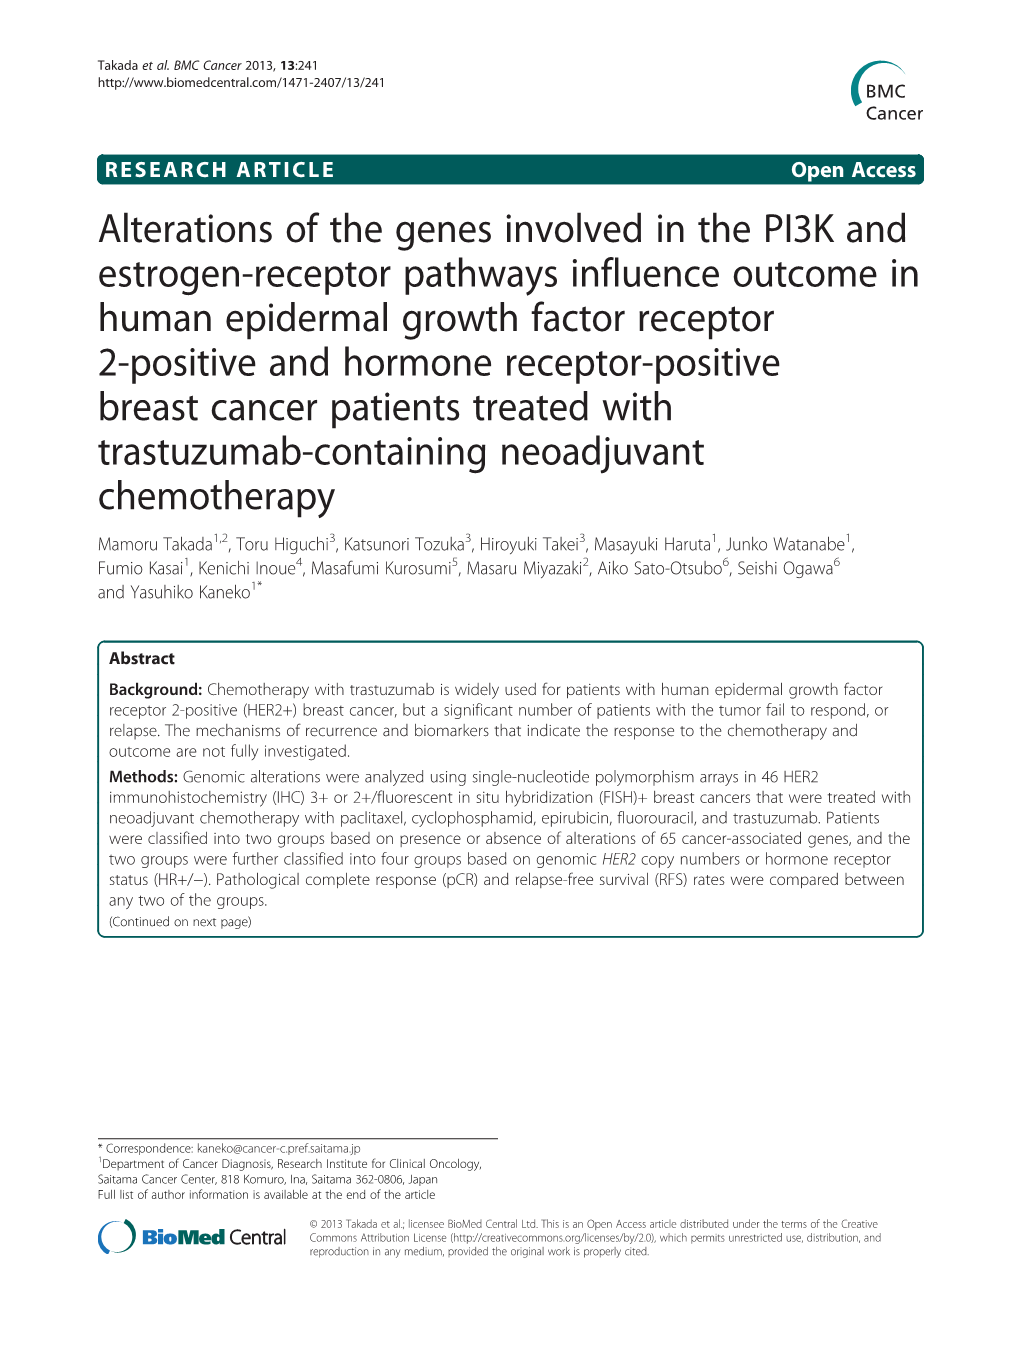 Alterations of the Genes Involved in the PI3K and Estrogen-Receptor